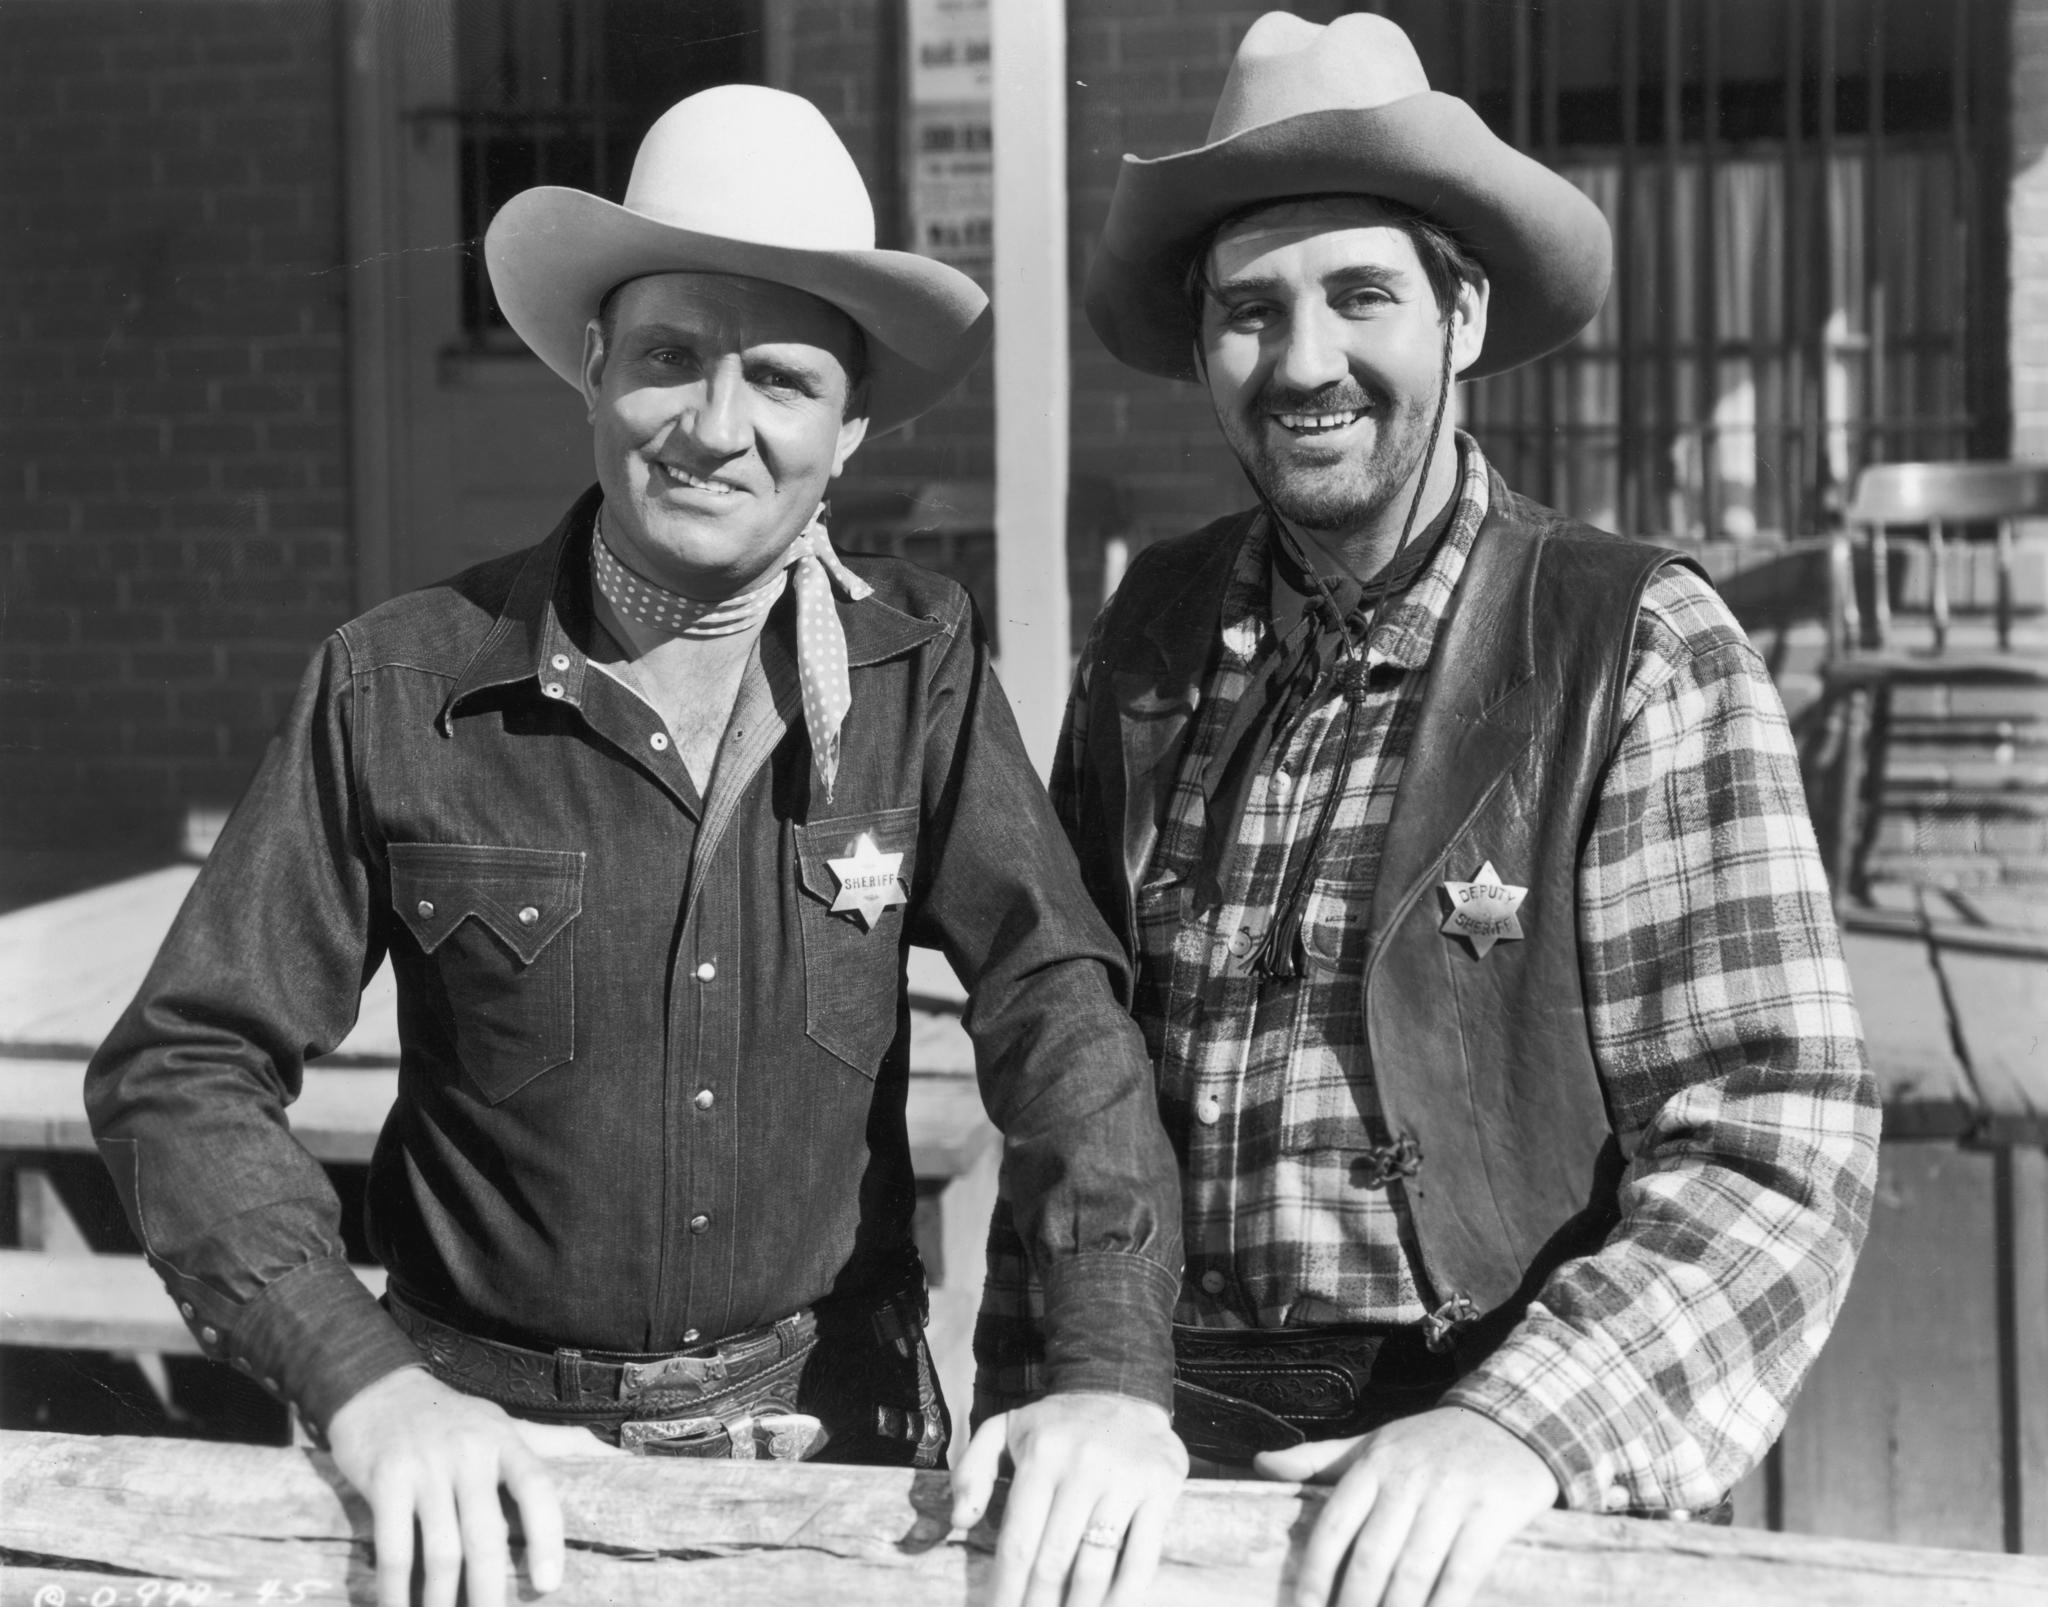 Gene Autry and Pat Buttram